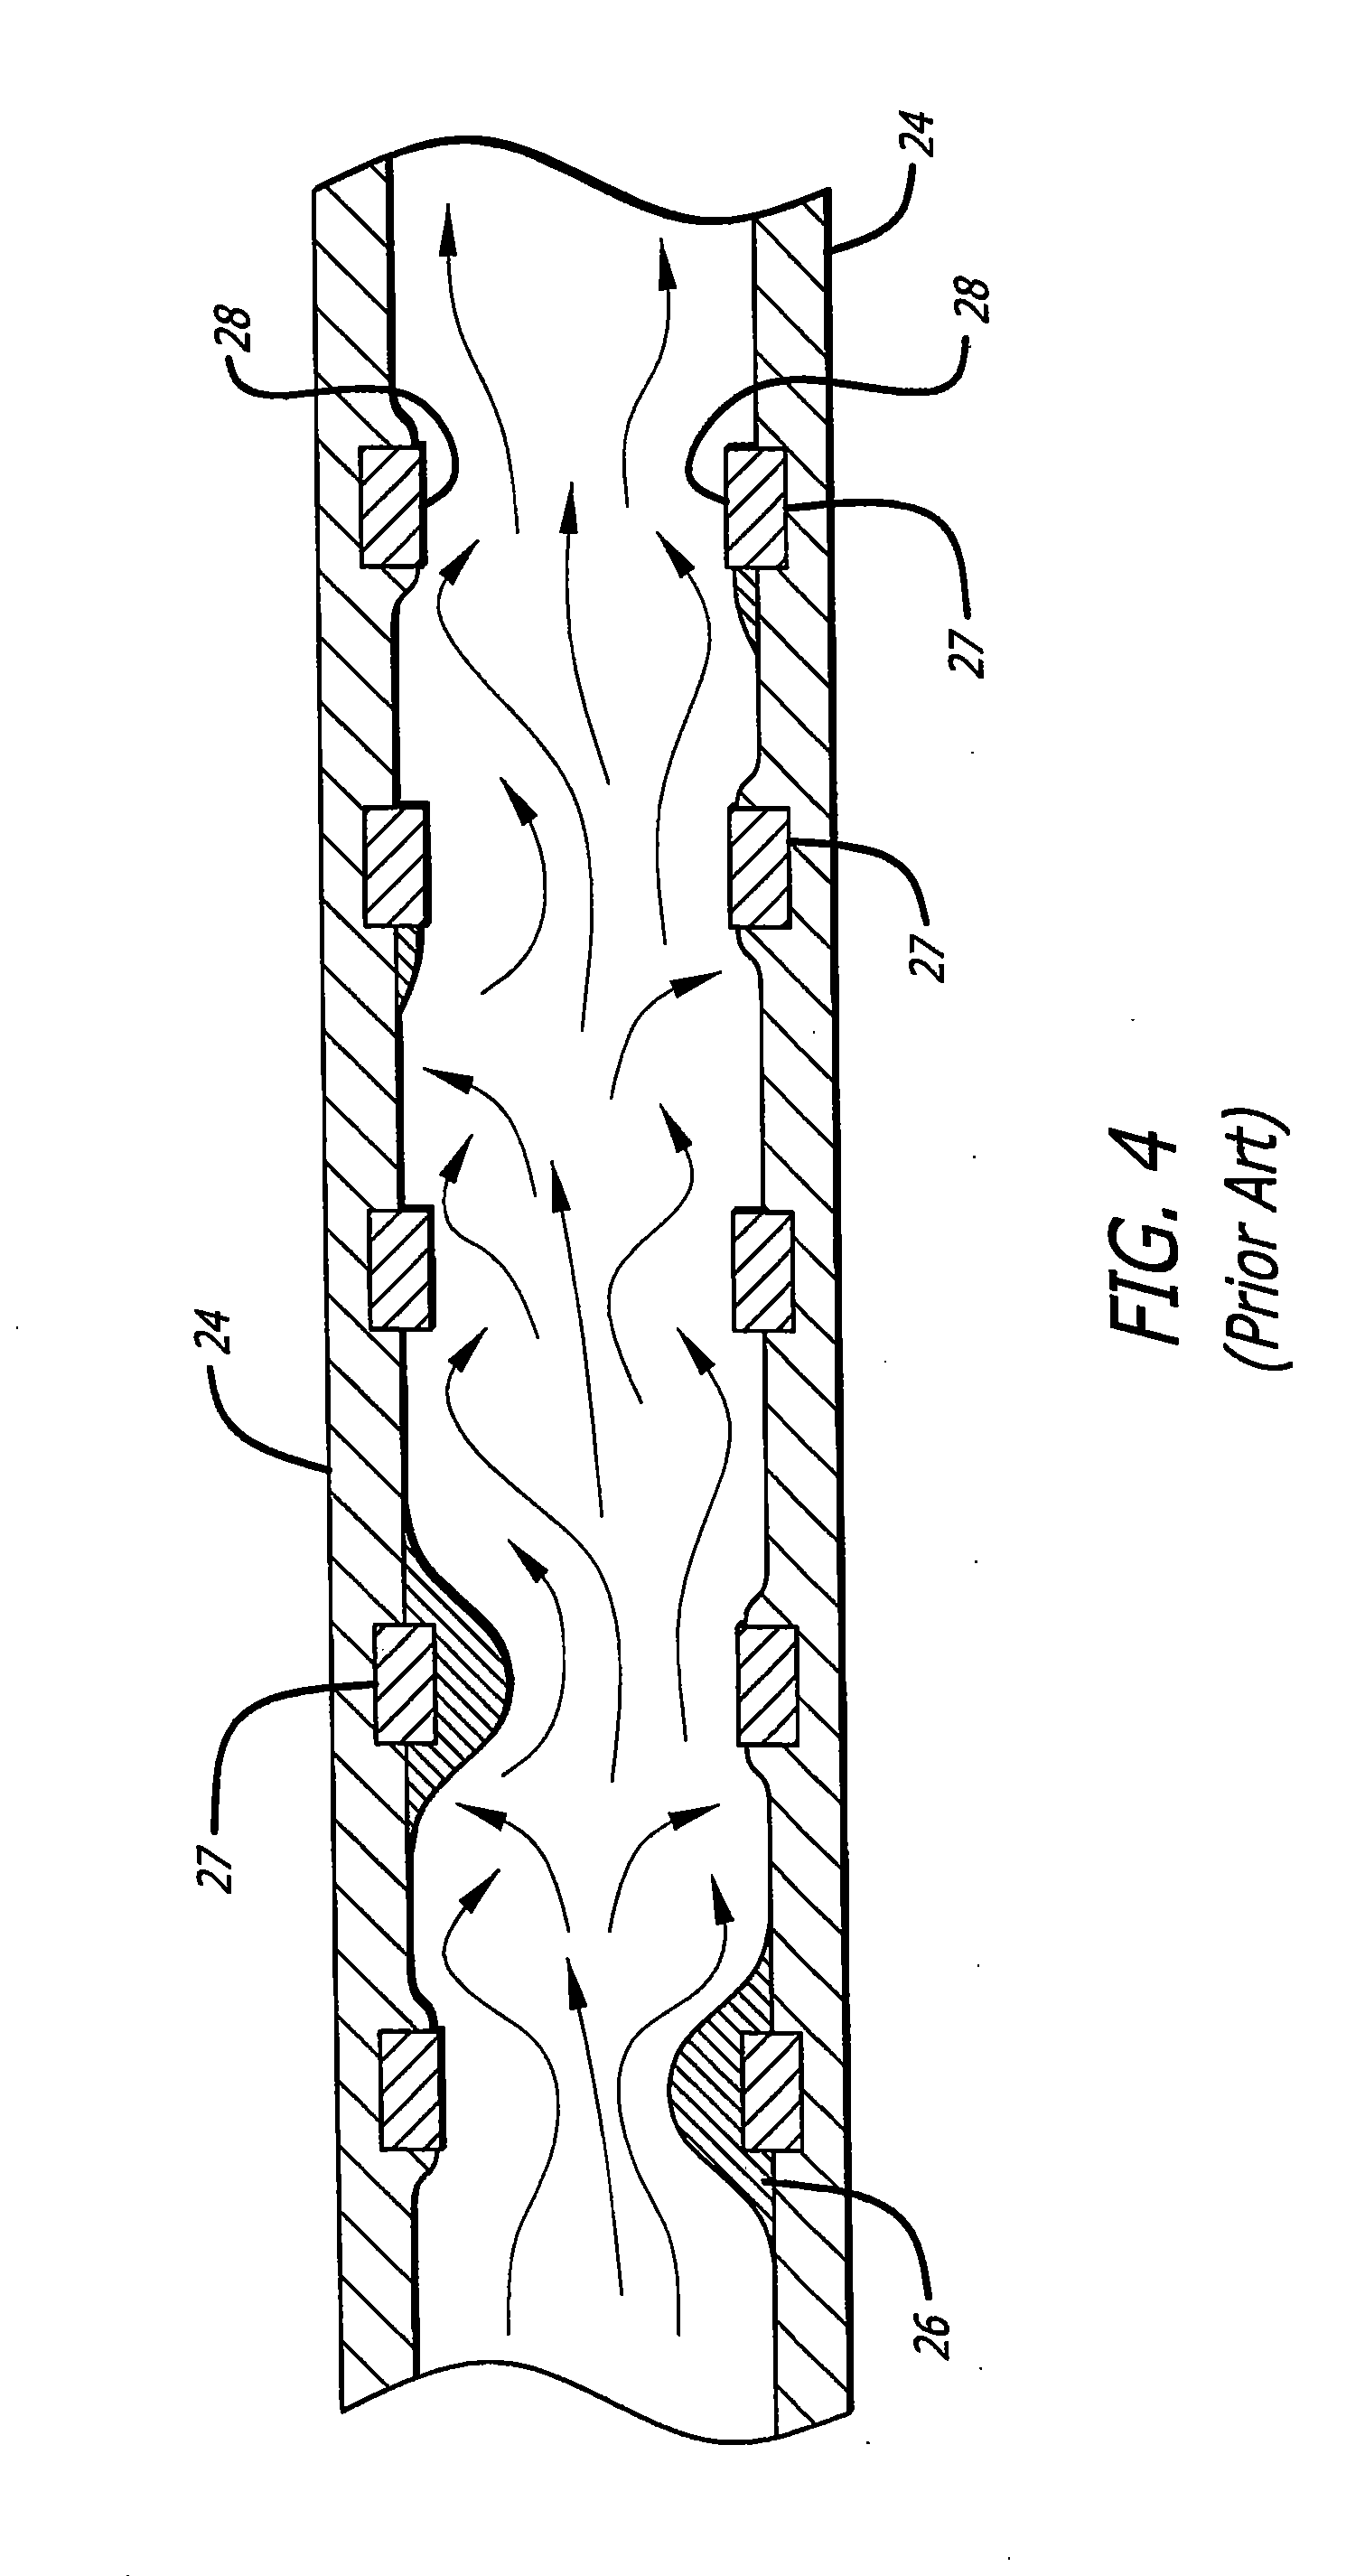 Apparatus and method for formation of foil-shaped stent struts